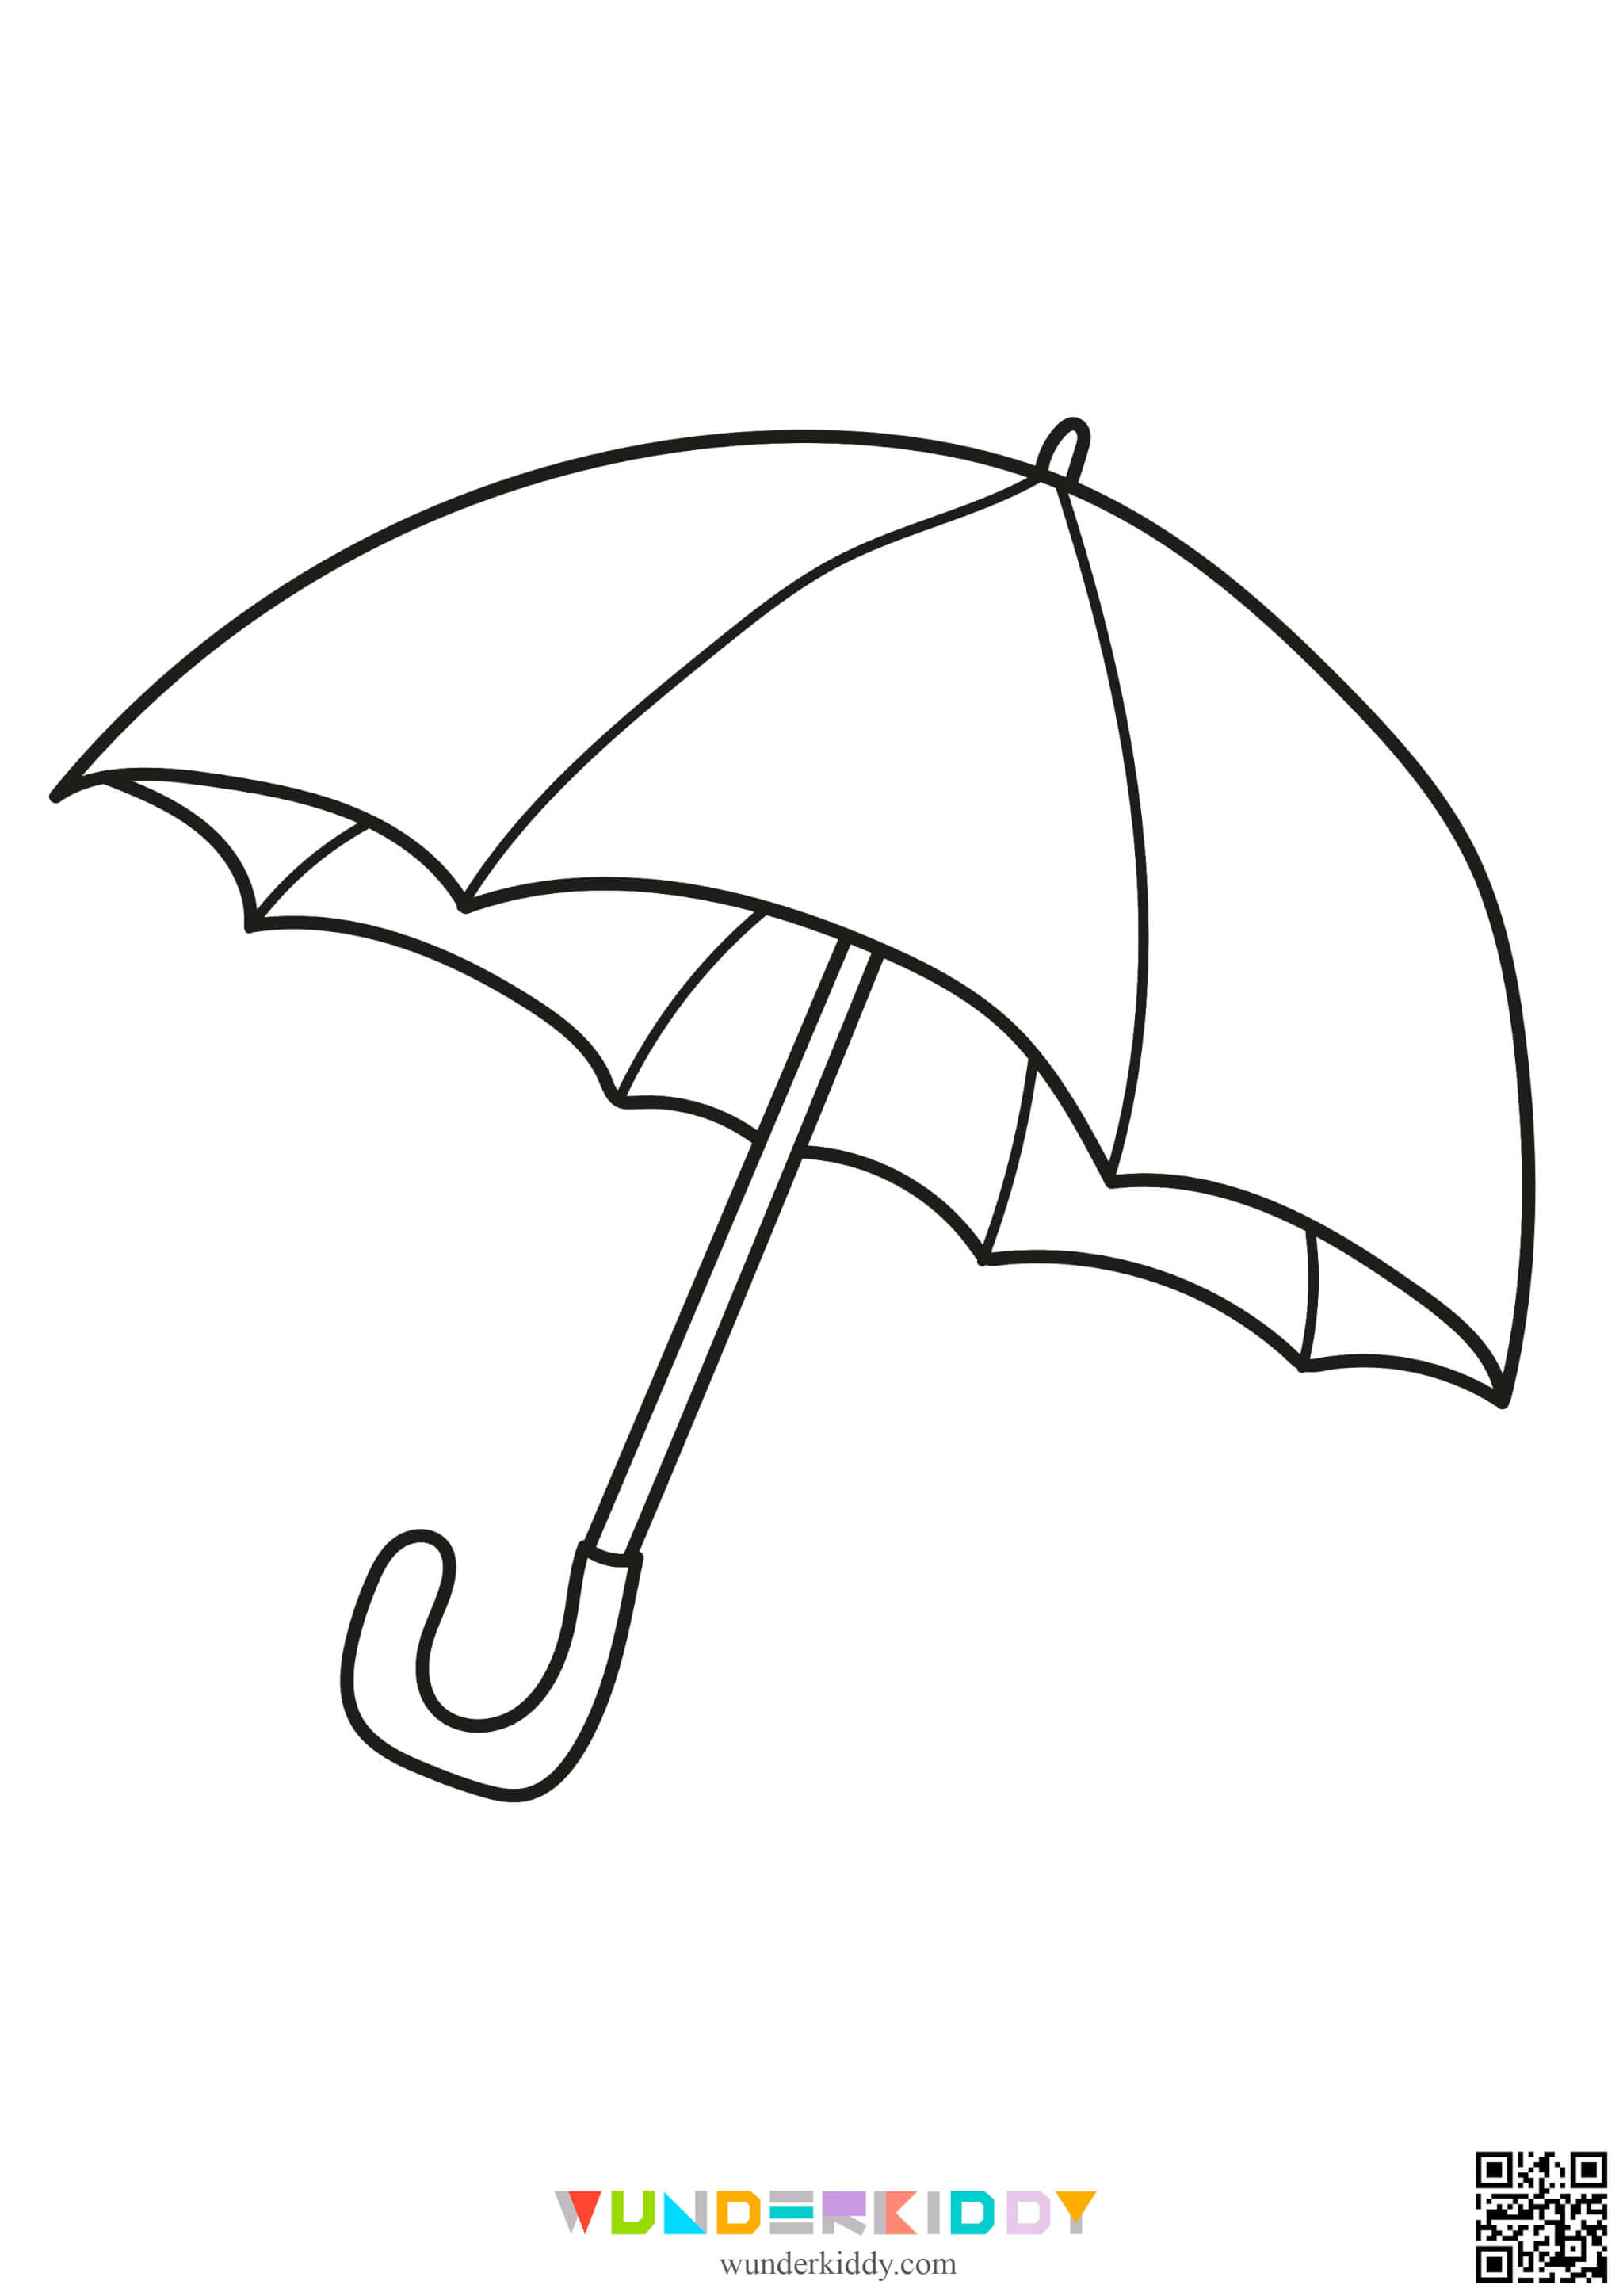 Umbrella Coloring Pages for Kids - Image 5